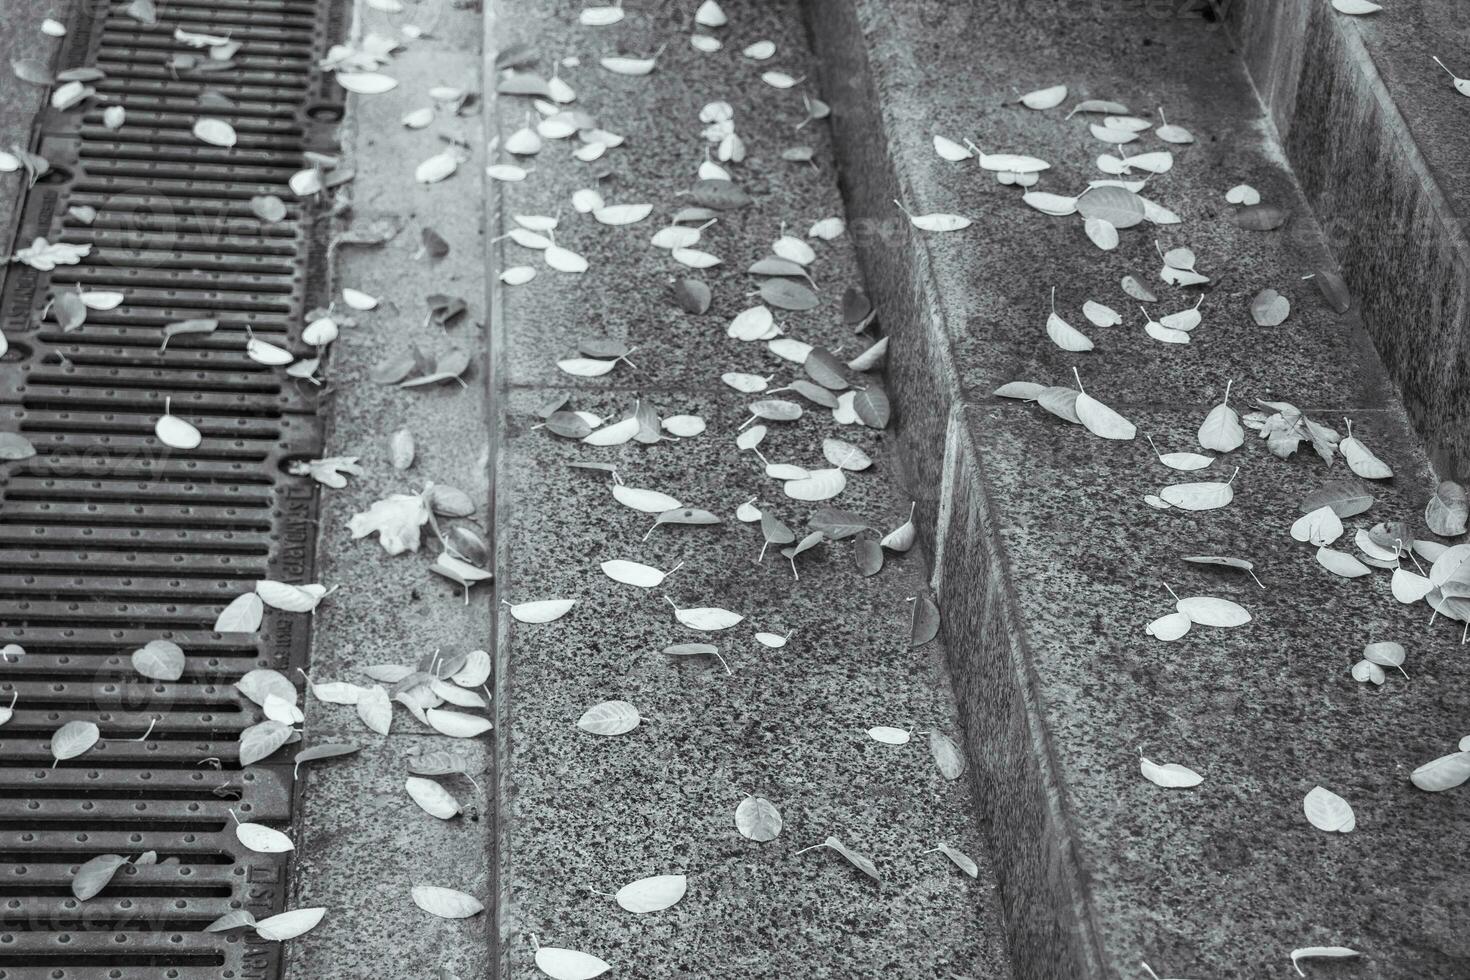 Autumn leaves on the ground near steps black and white photo. Iron grille near steps. photo